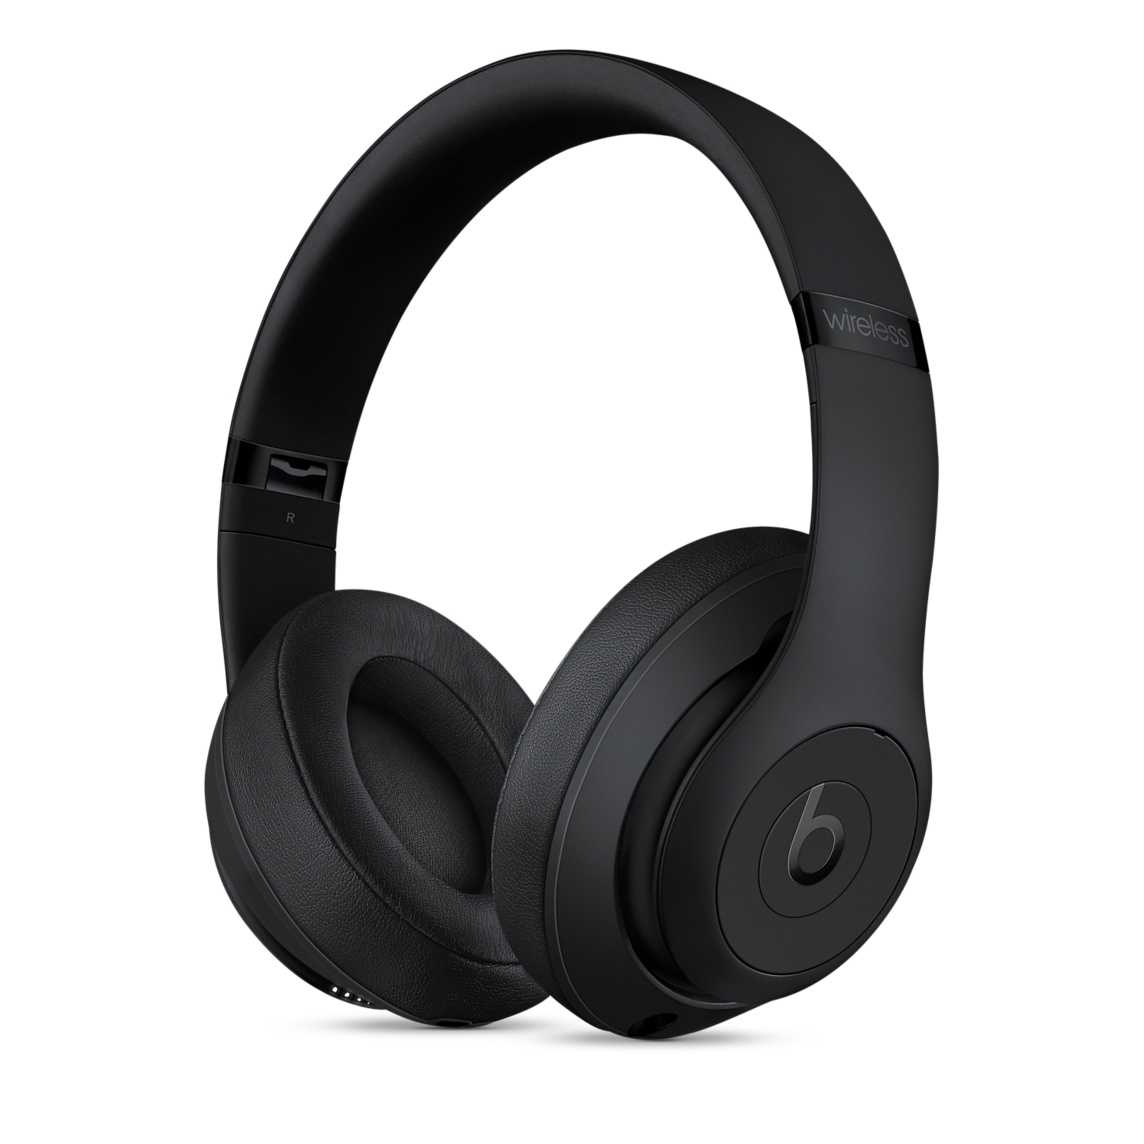 Apple releasing a new Studio3 Wireless headphone with Pure ANC